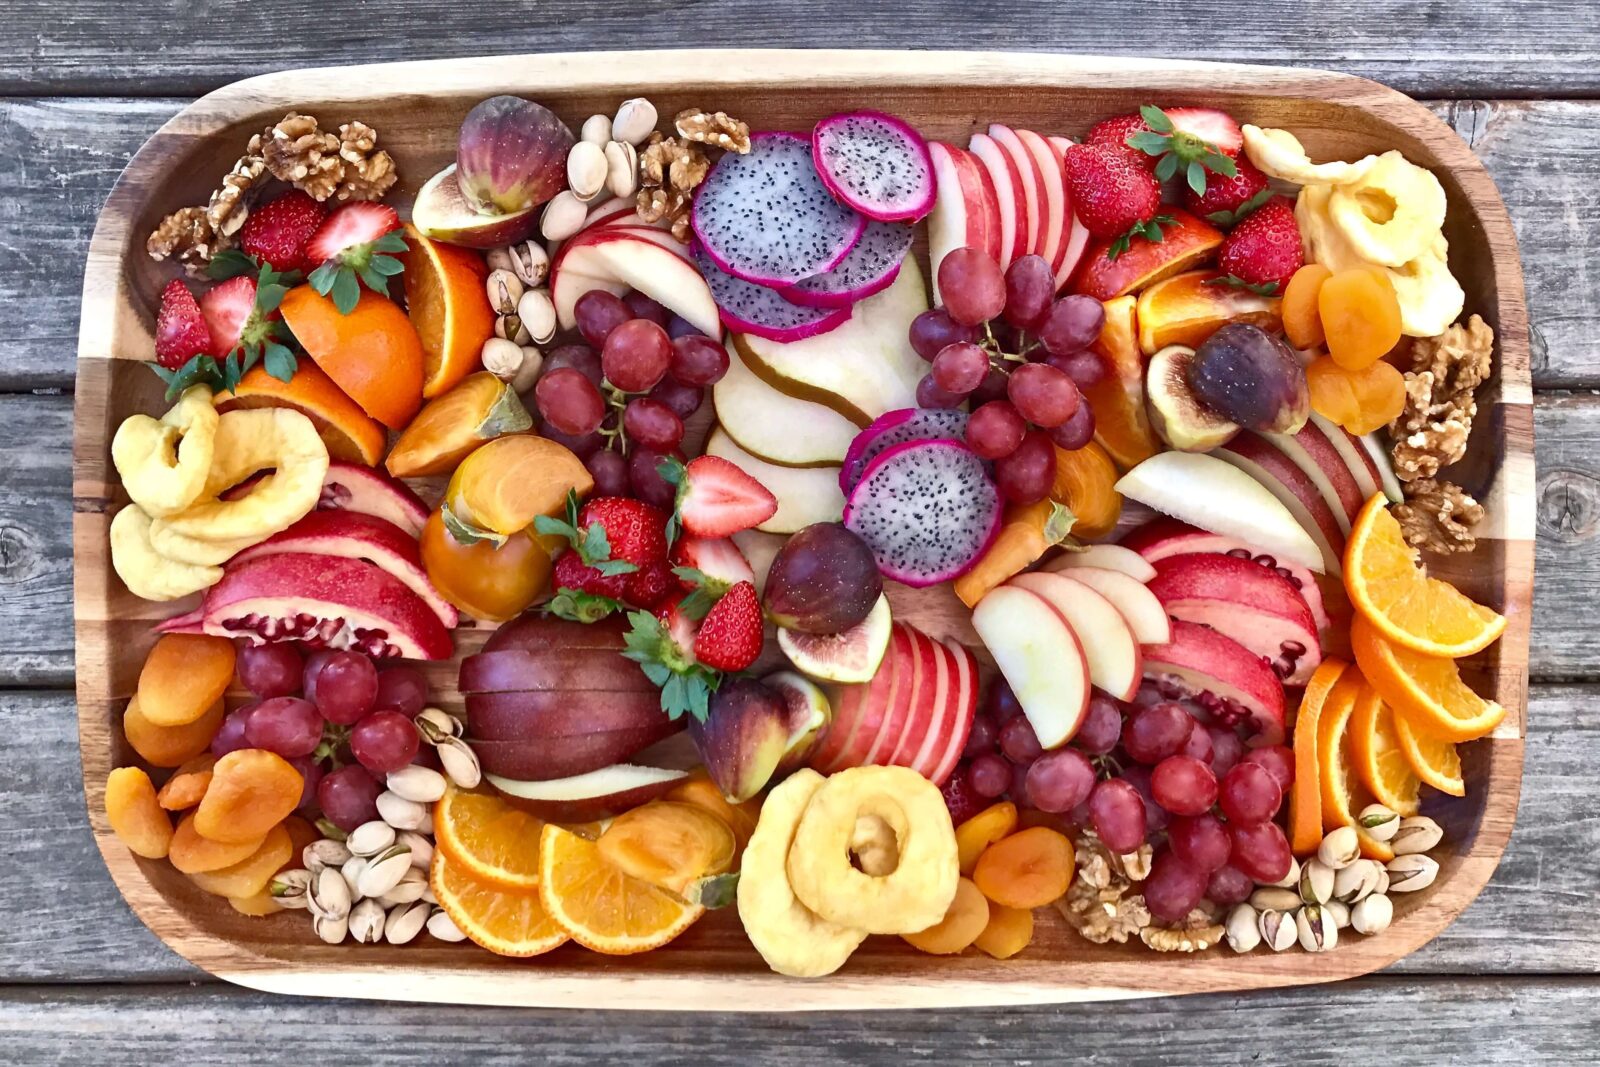 Bright and colourful vegetables and fruit are loaded with antioxidants and are among the best foods for skin health. Image: Unsplash